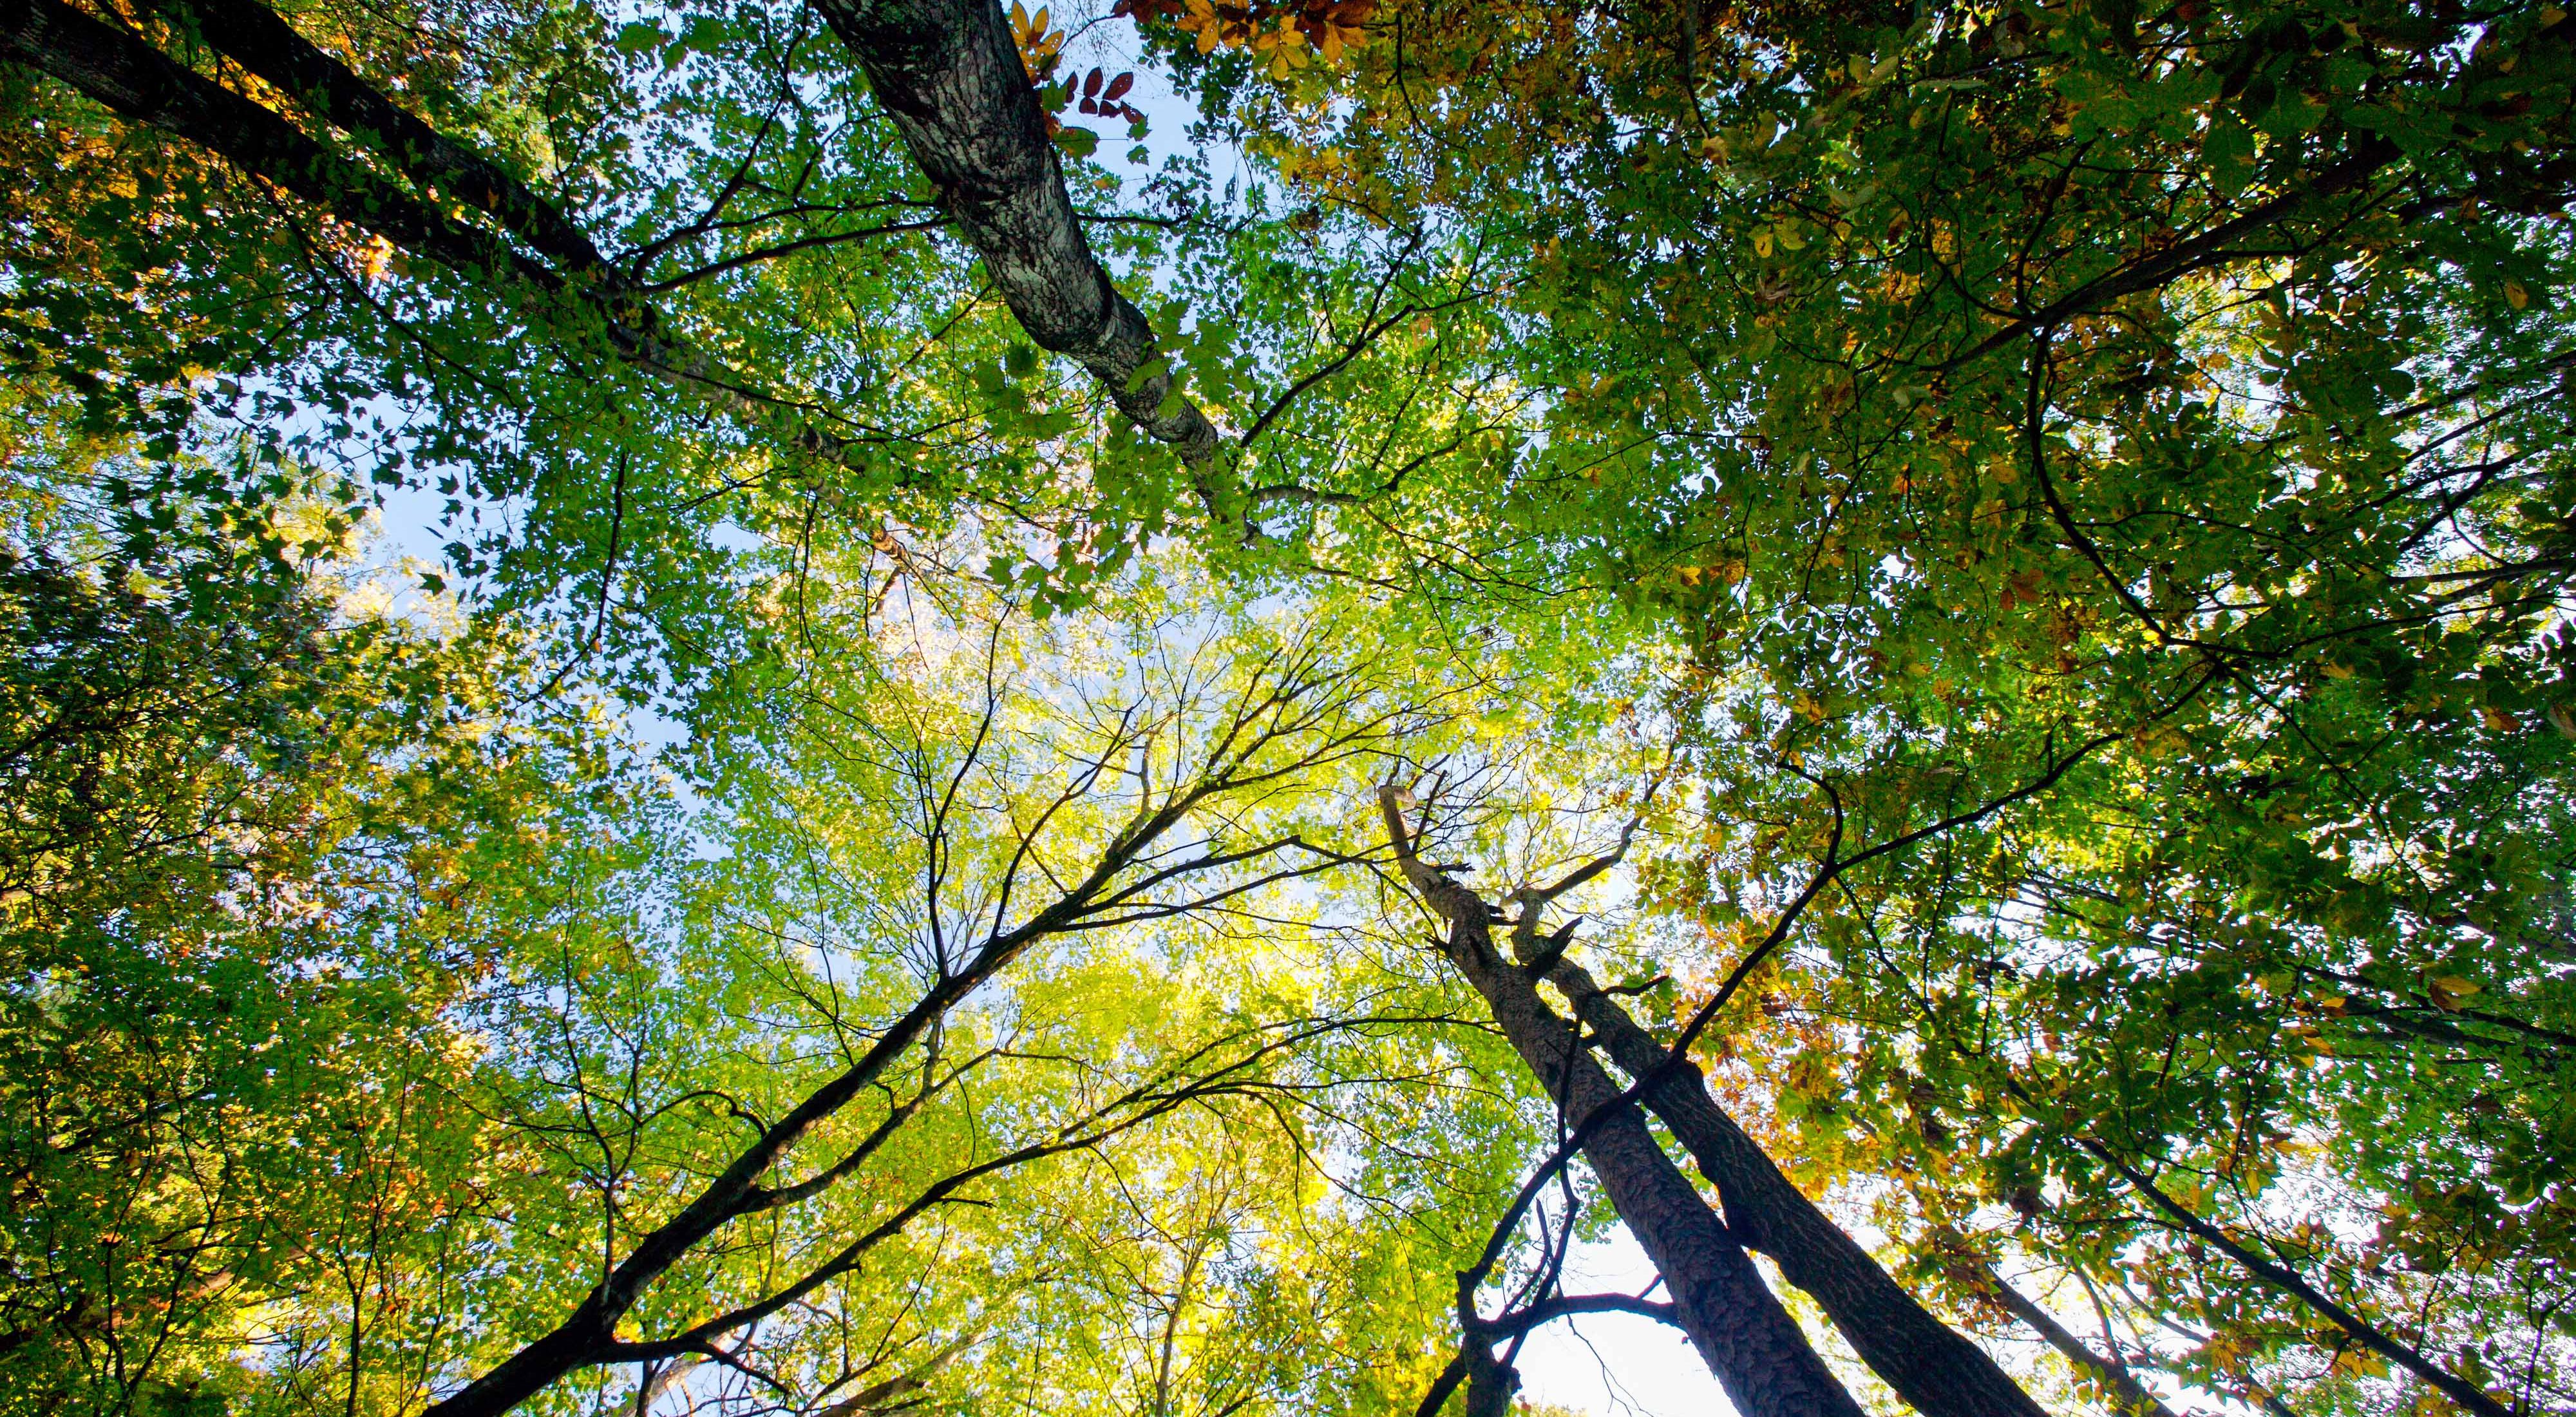 Looking upward into the canopy of southern old-growth forest in Marshall Forest Preserve, Rome, Georgia.